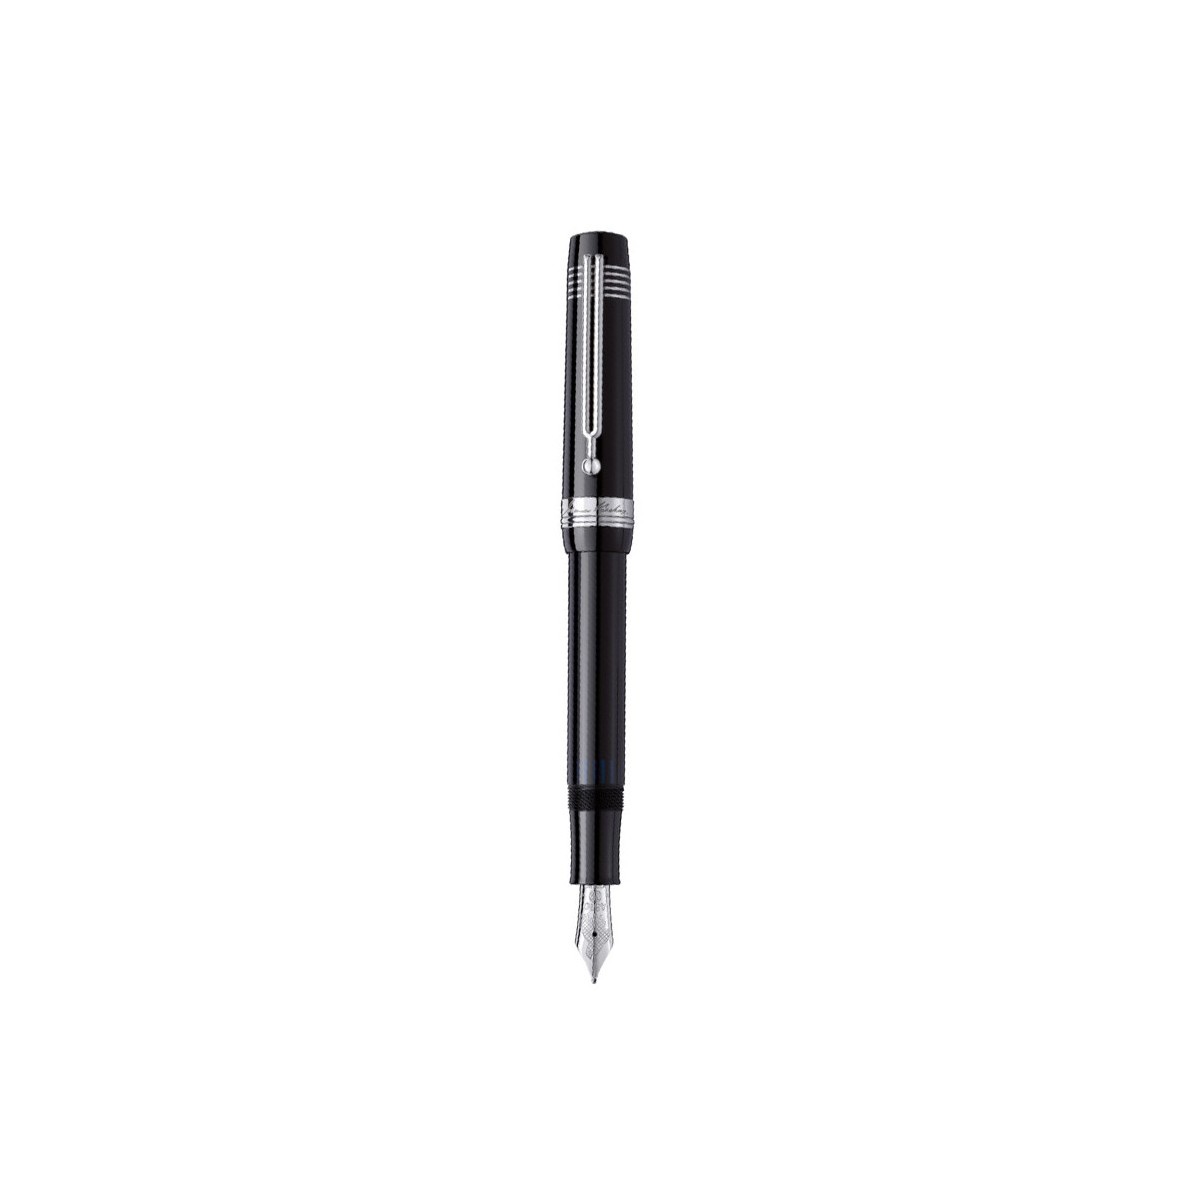 Taccuino Montblanc Stationery A5 Righe